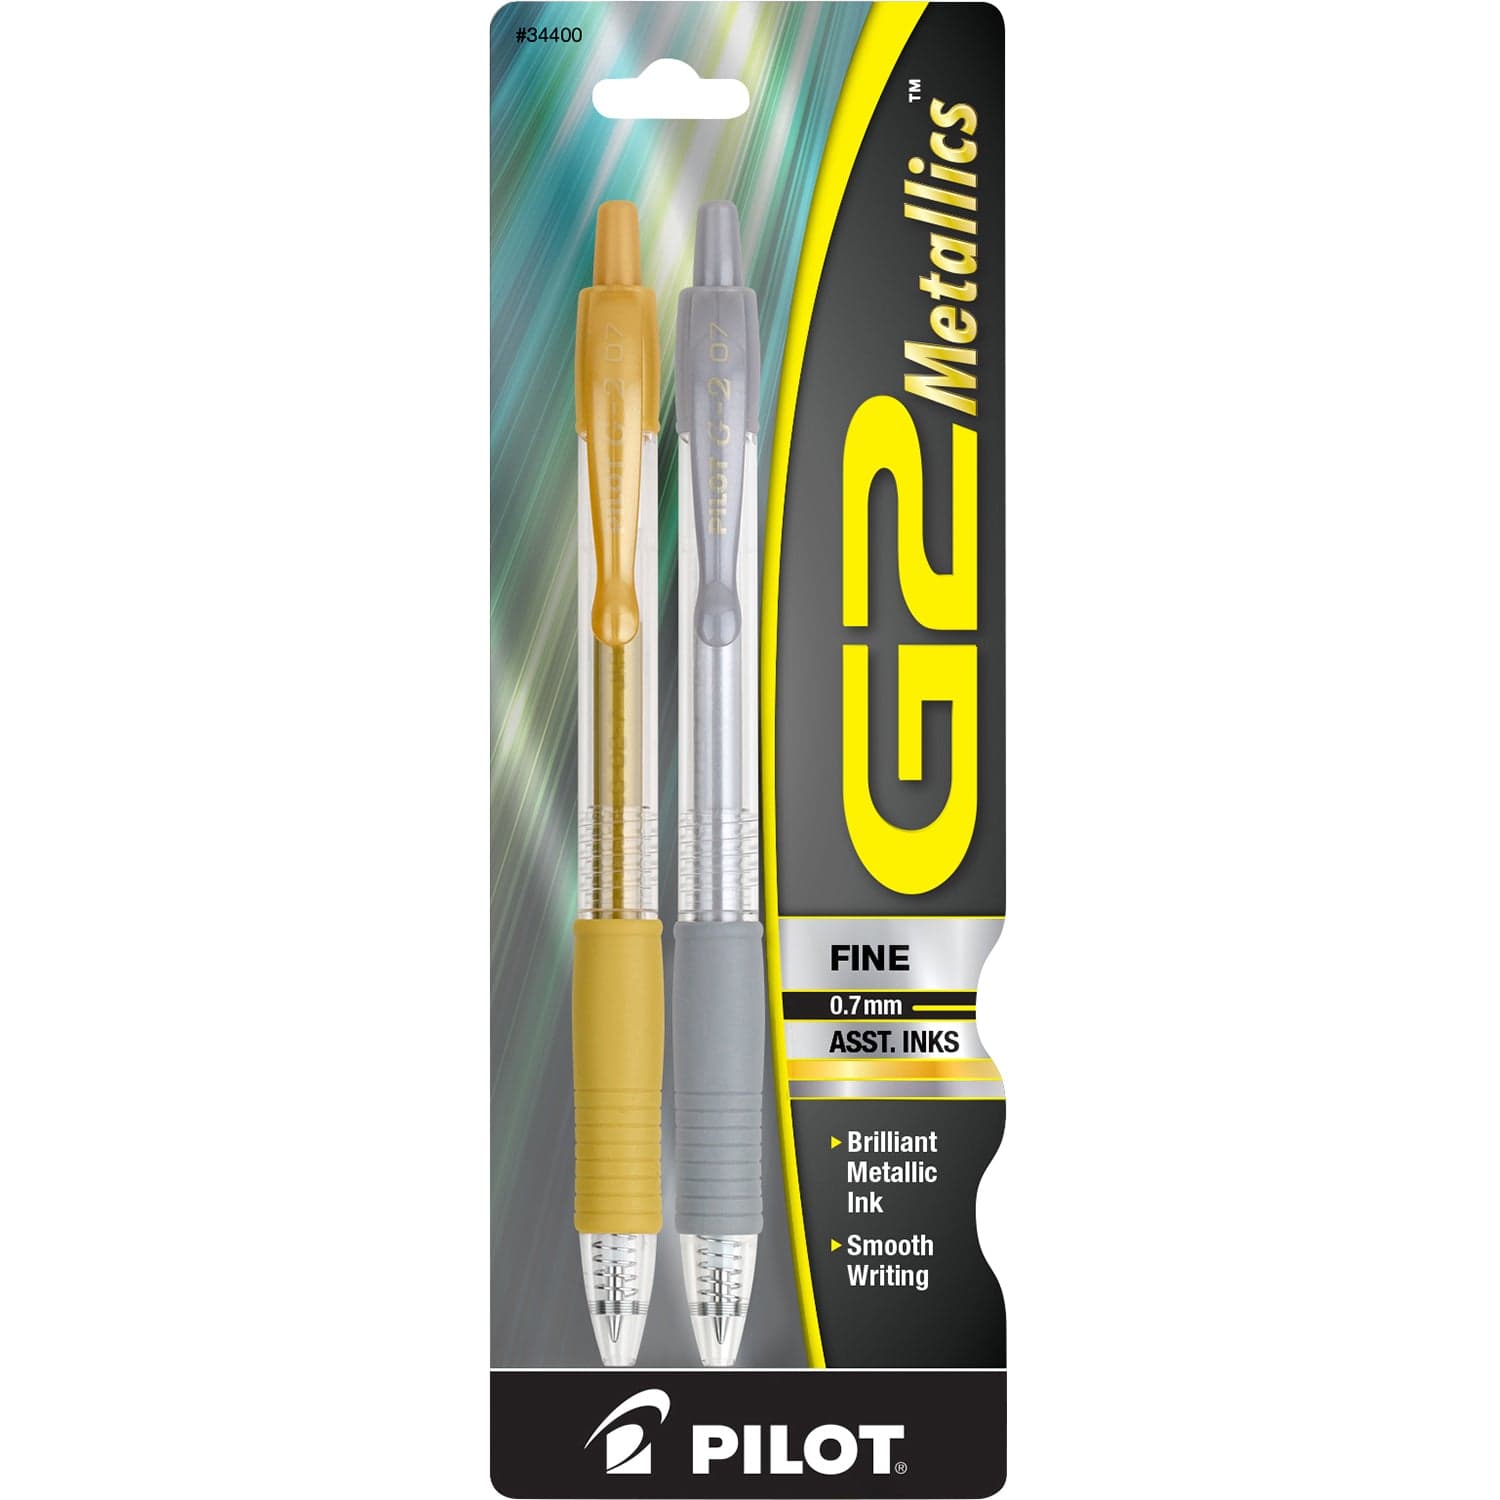 Pilot G2 Retractable Gel Rolling Ball Pens, Fine Point, Assorted Ink - 5 pack